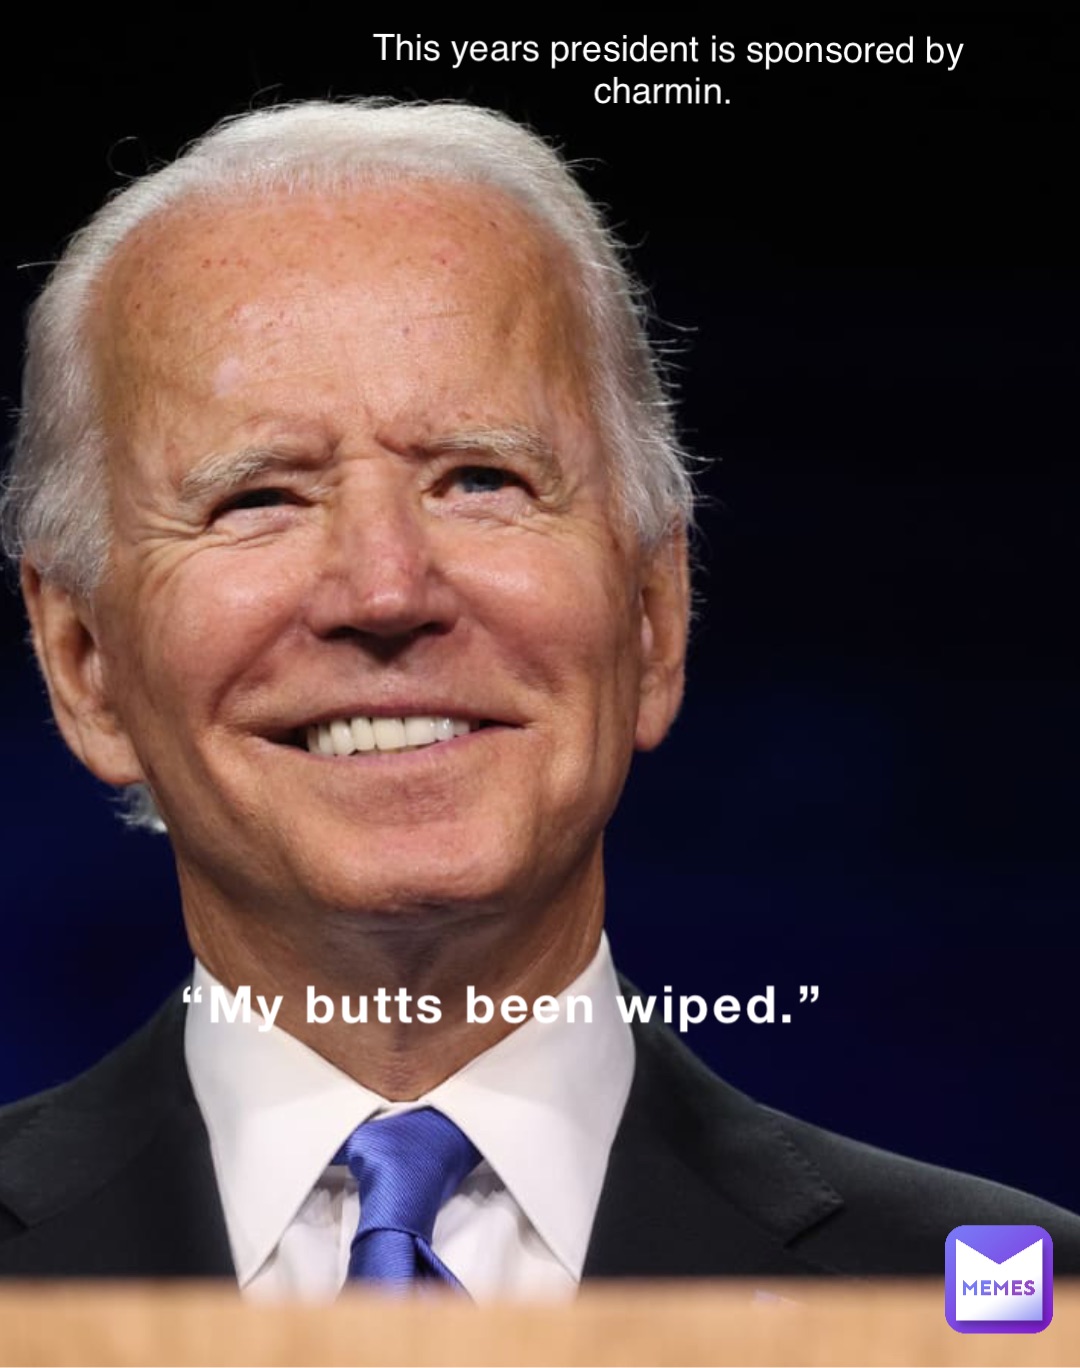 “My butts been wiped.” This years president is sponsored by charmin.